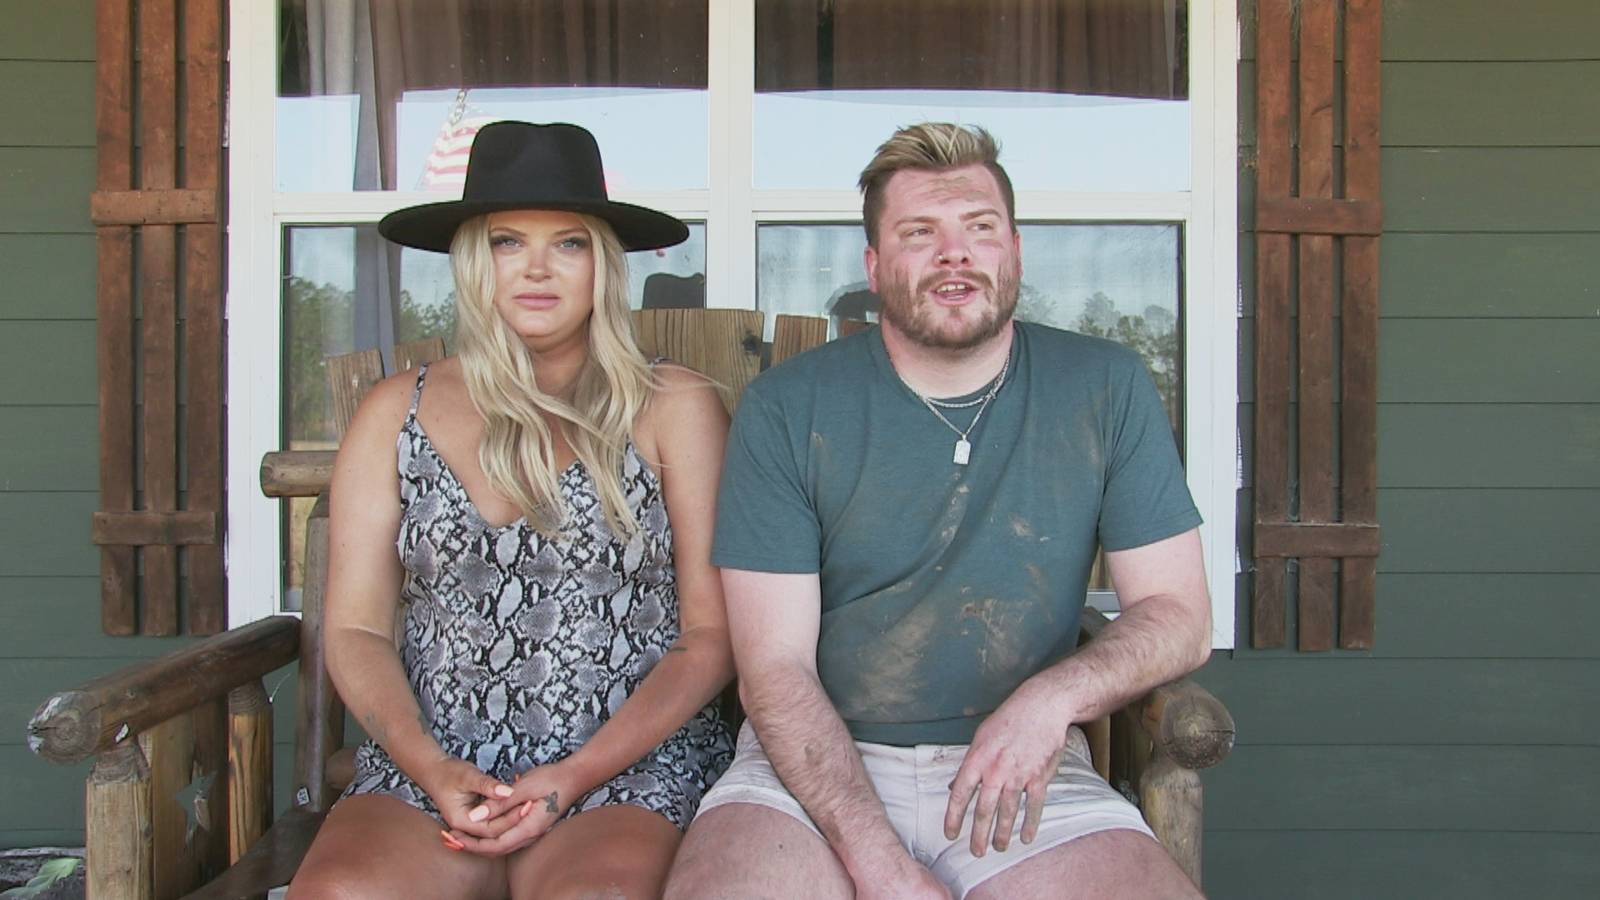 'Floribama Shore' stars Aimee Hall and Codi Butts, covered in mud, sitting on her porch looking into the camera